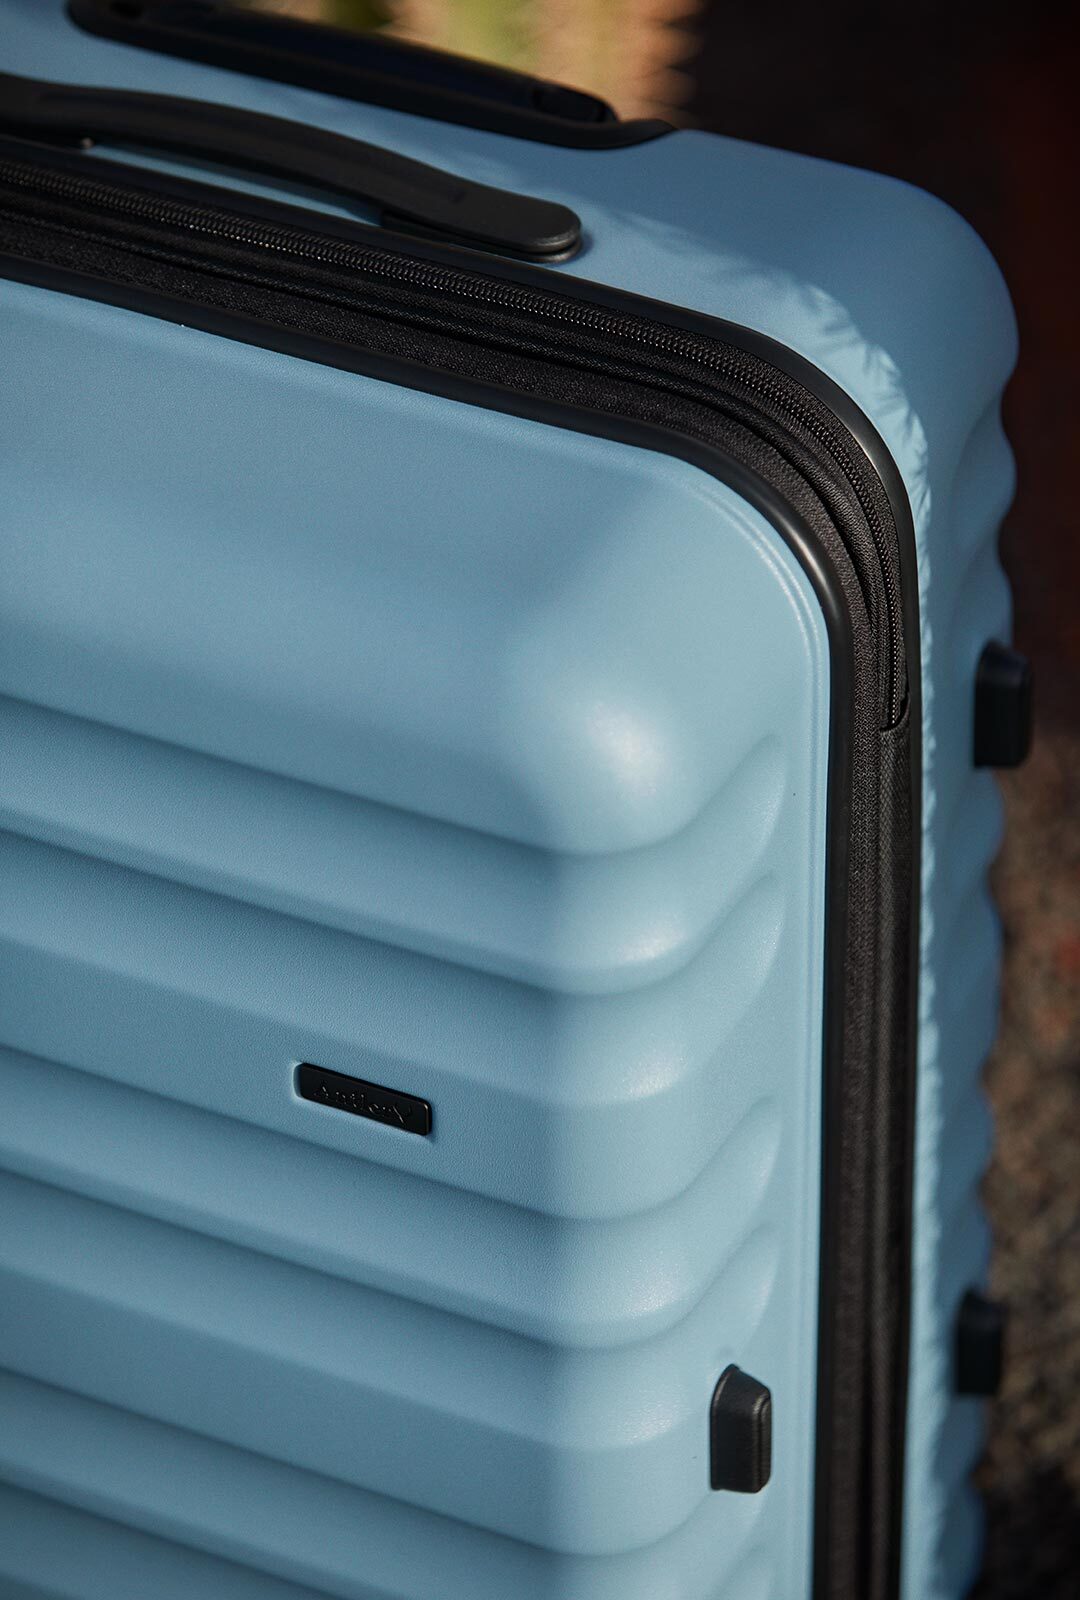 Antler Clifton hard-shell suitcase in Ocean blue